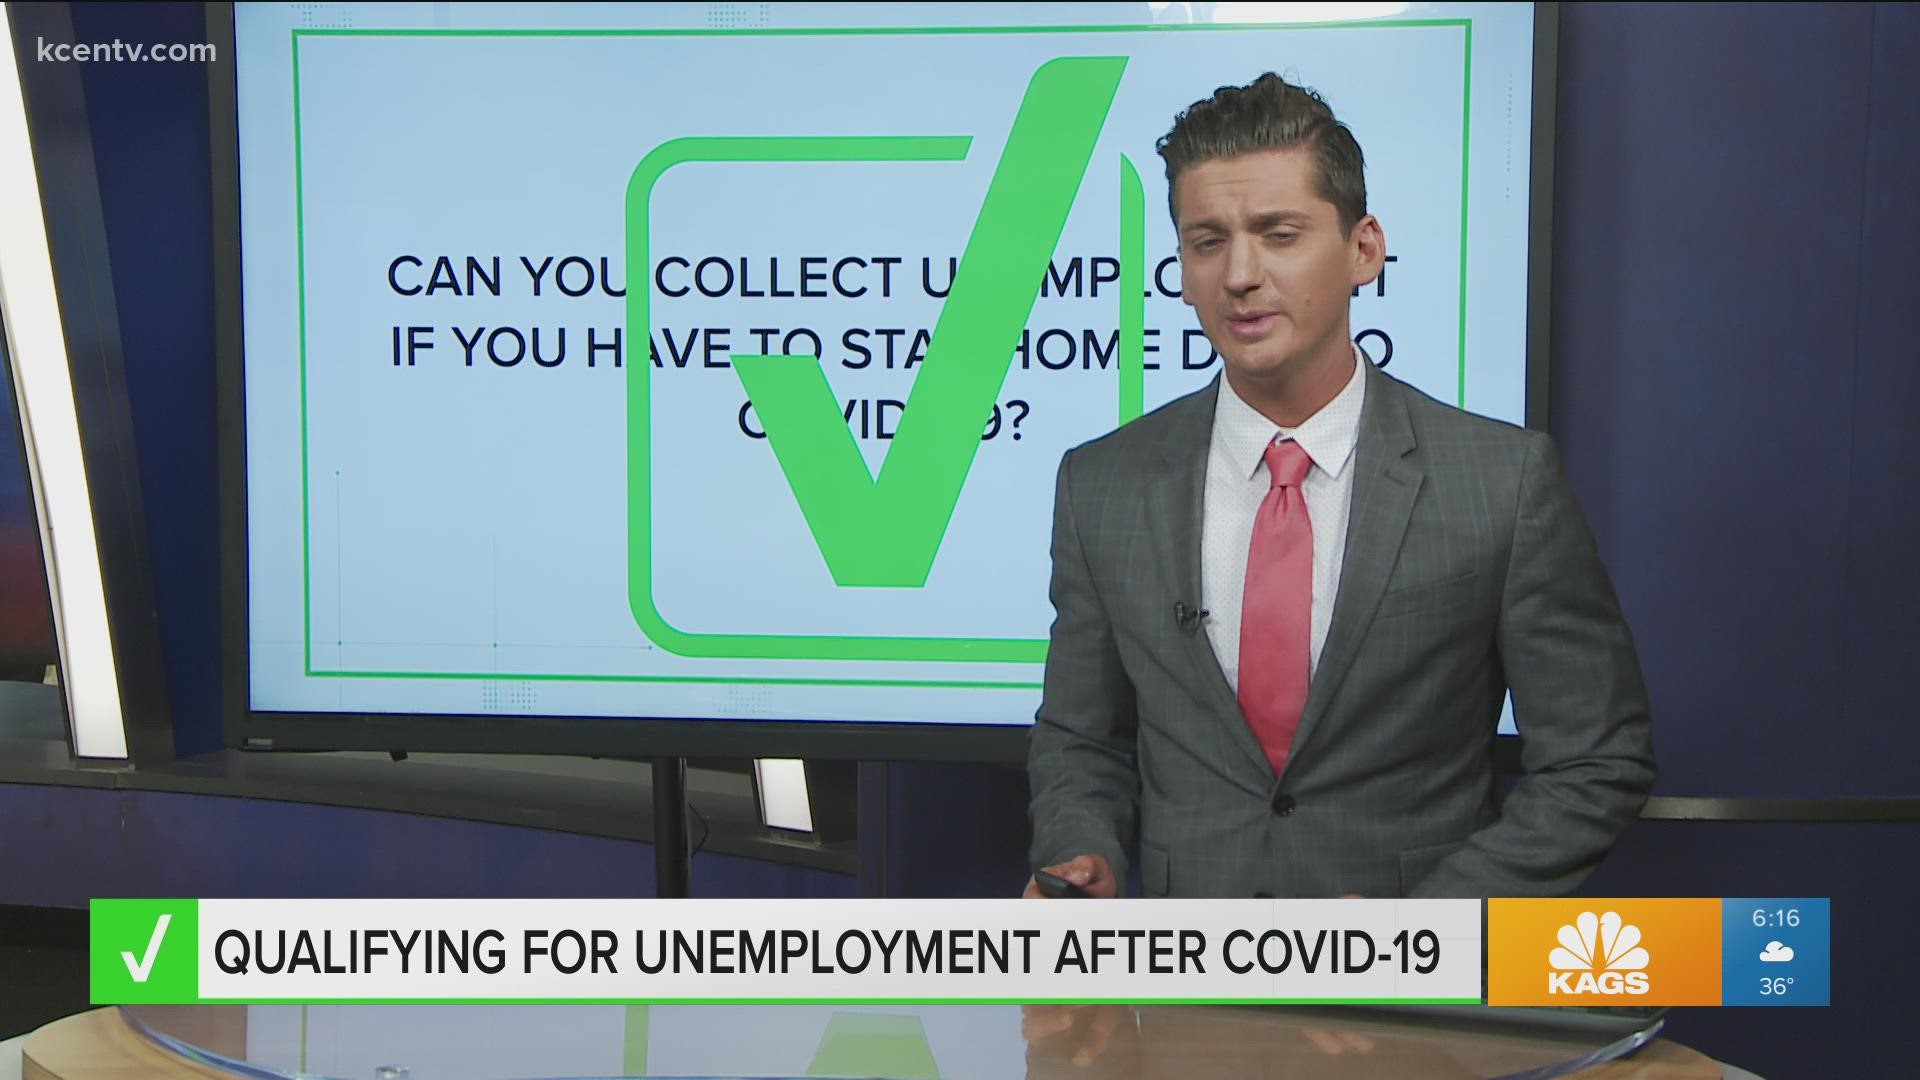 "Anyone who has a work separation can qualify for work-based benefits." This question has a few grey areas but 6 News Chris Rogers breaks it down.